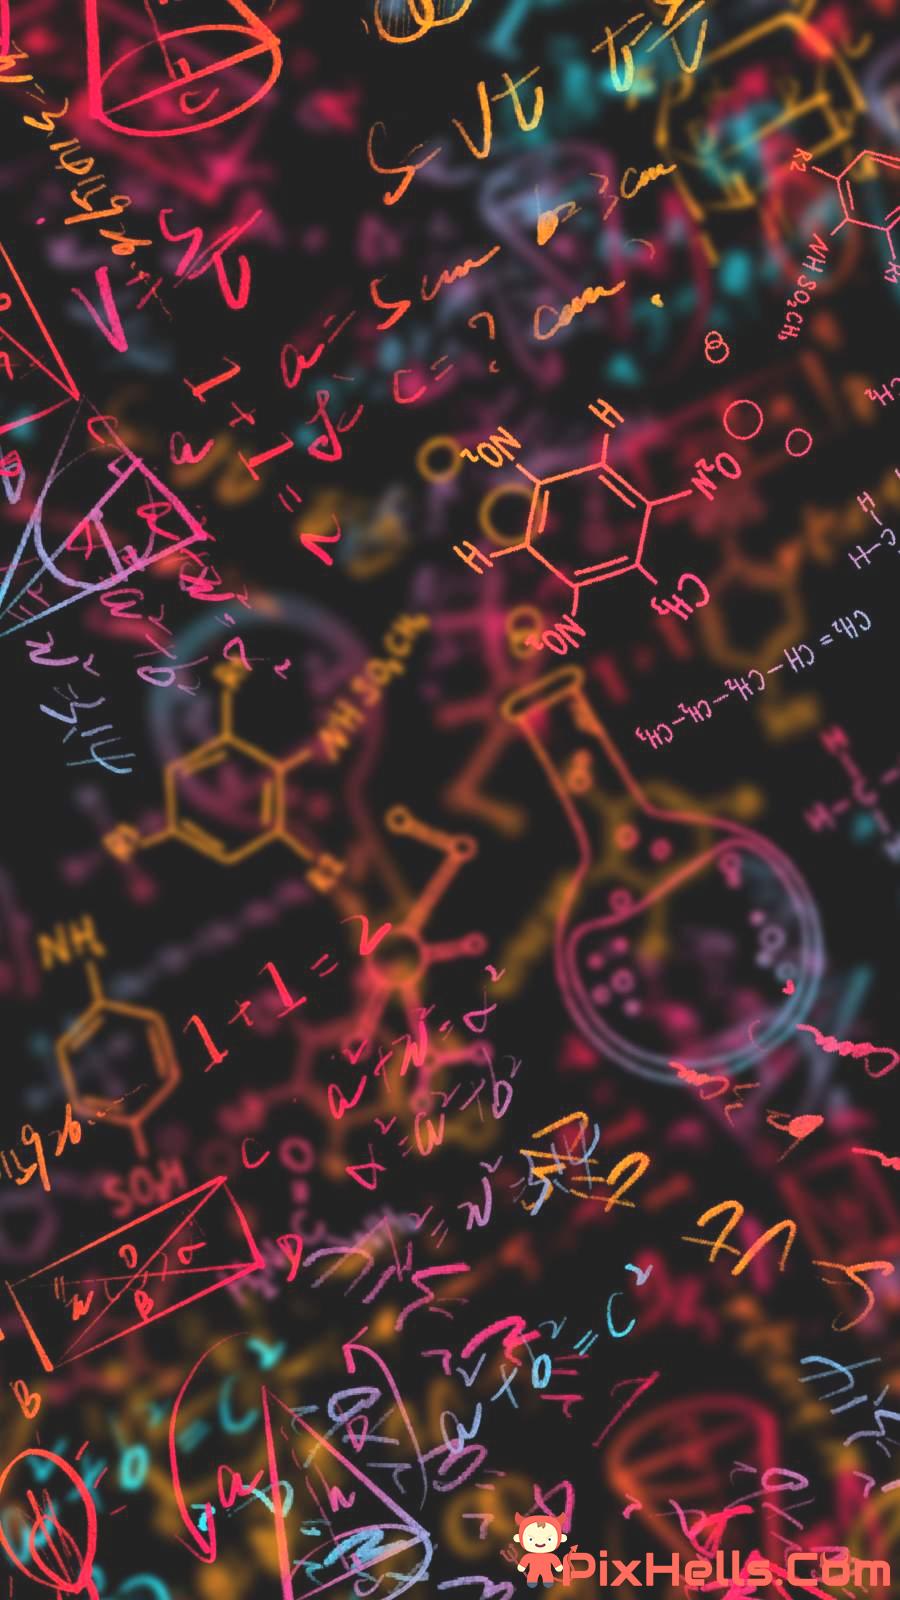 A colorful background with many different symbols - Chemistry